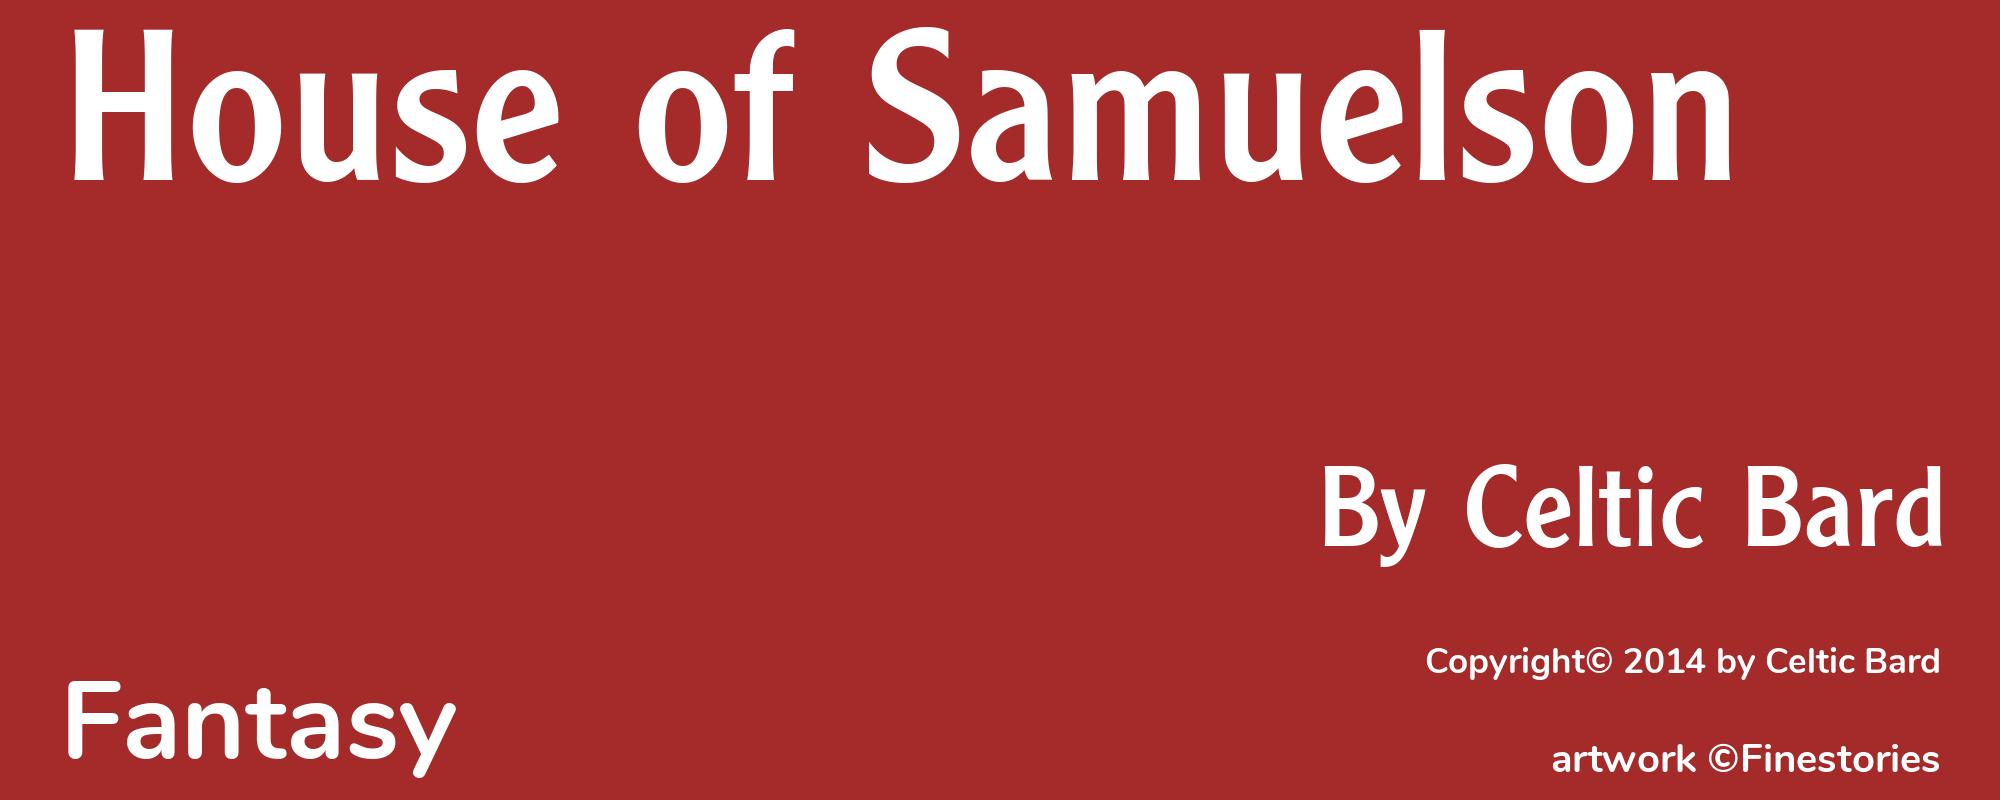 House of Samuelson - Cover